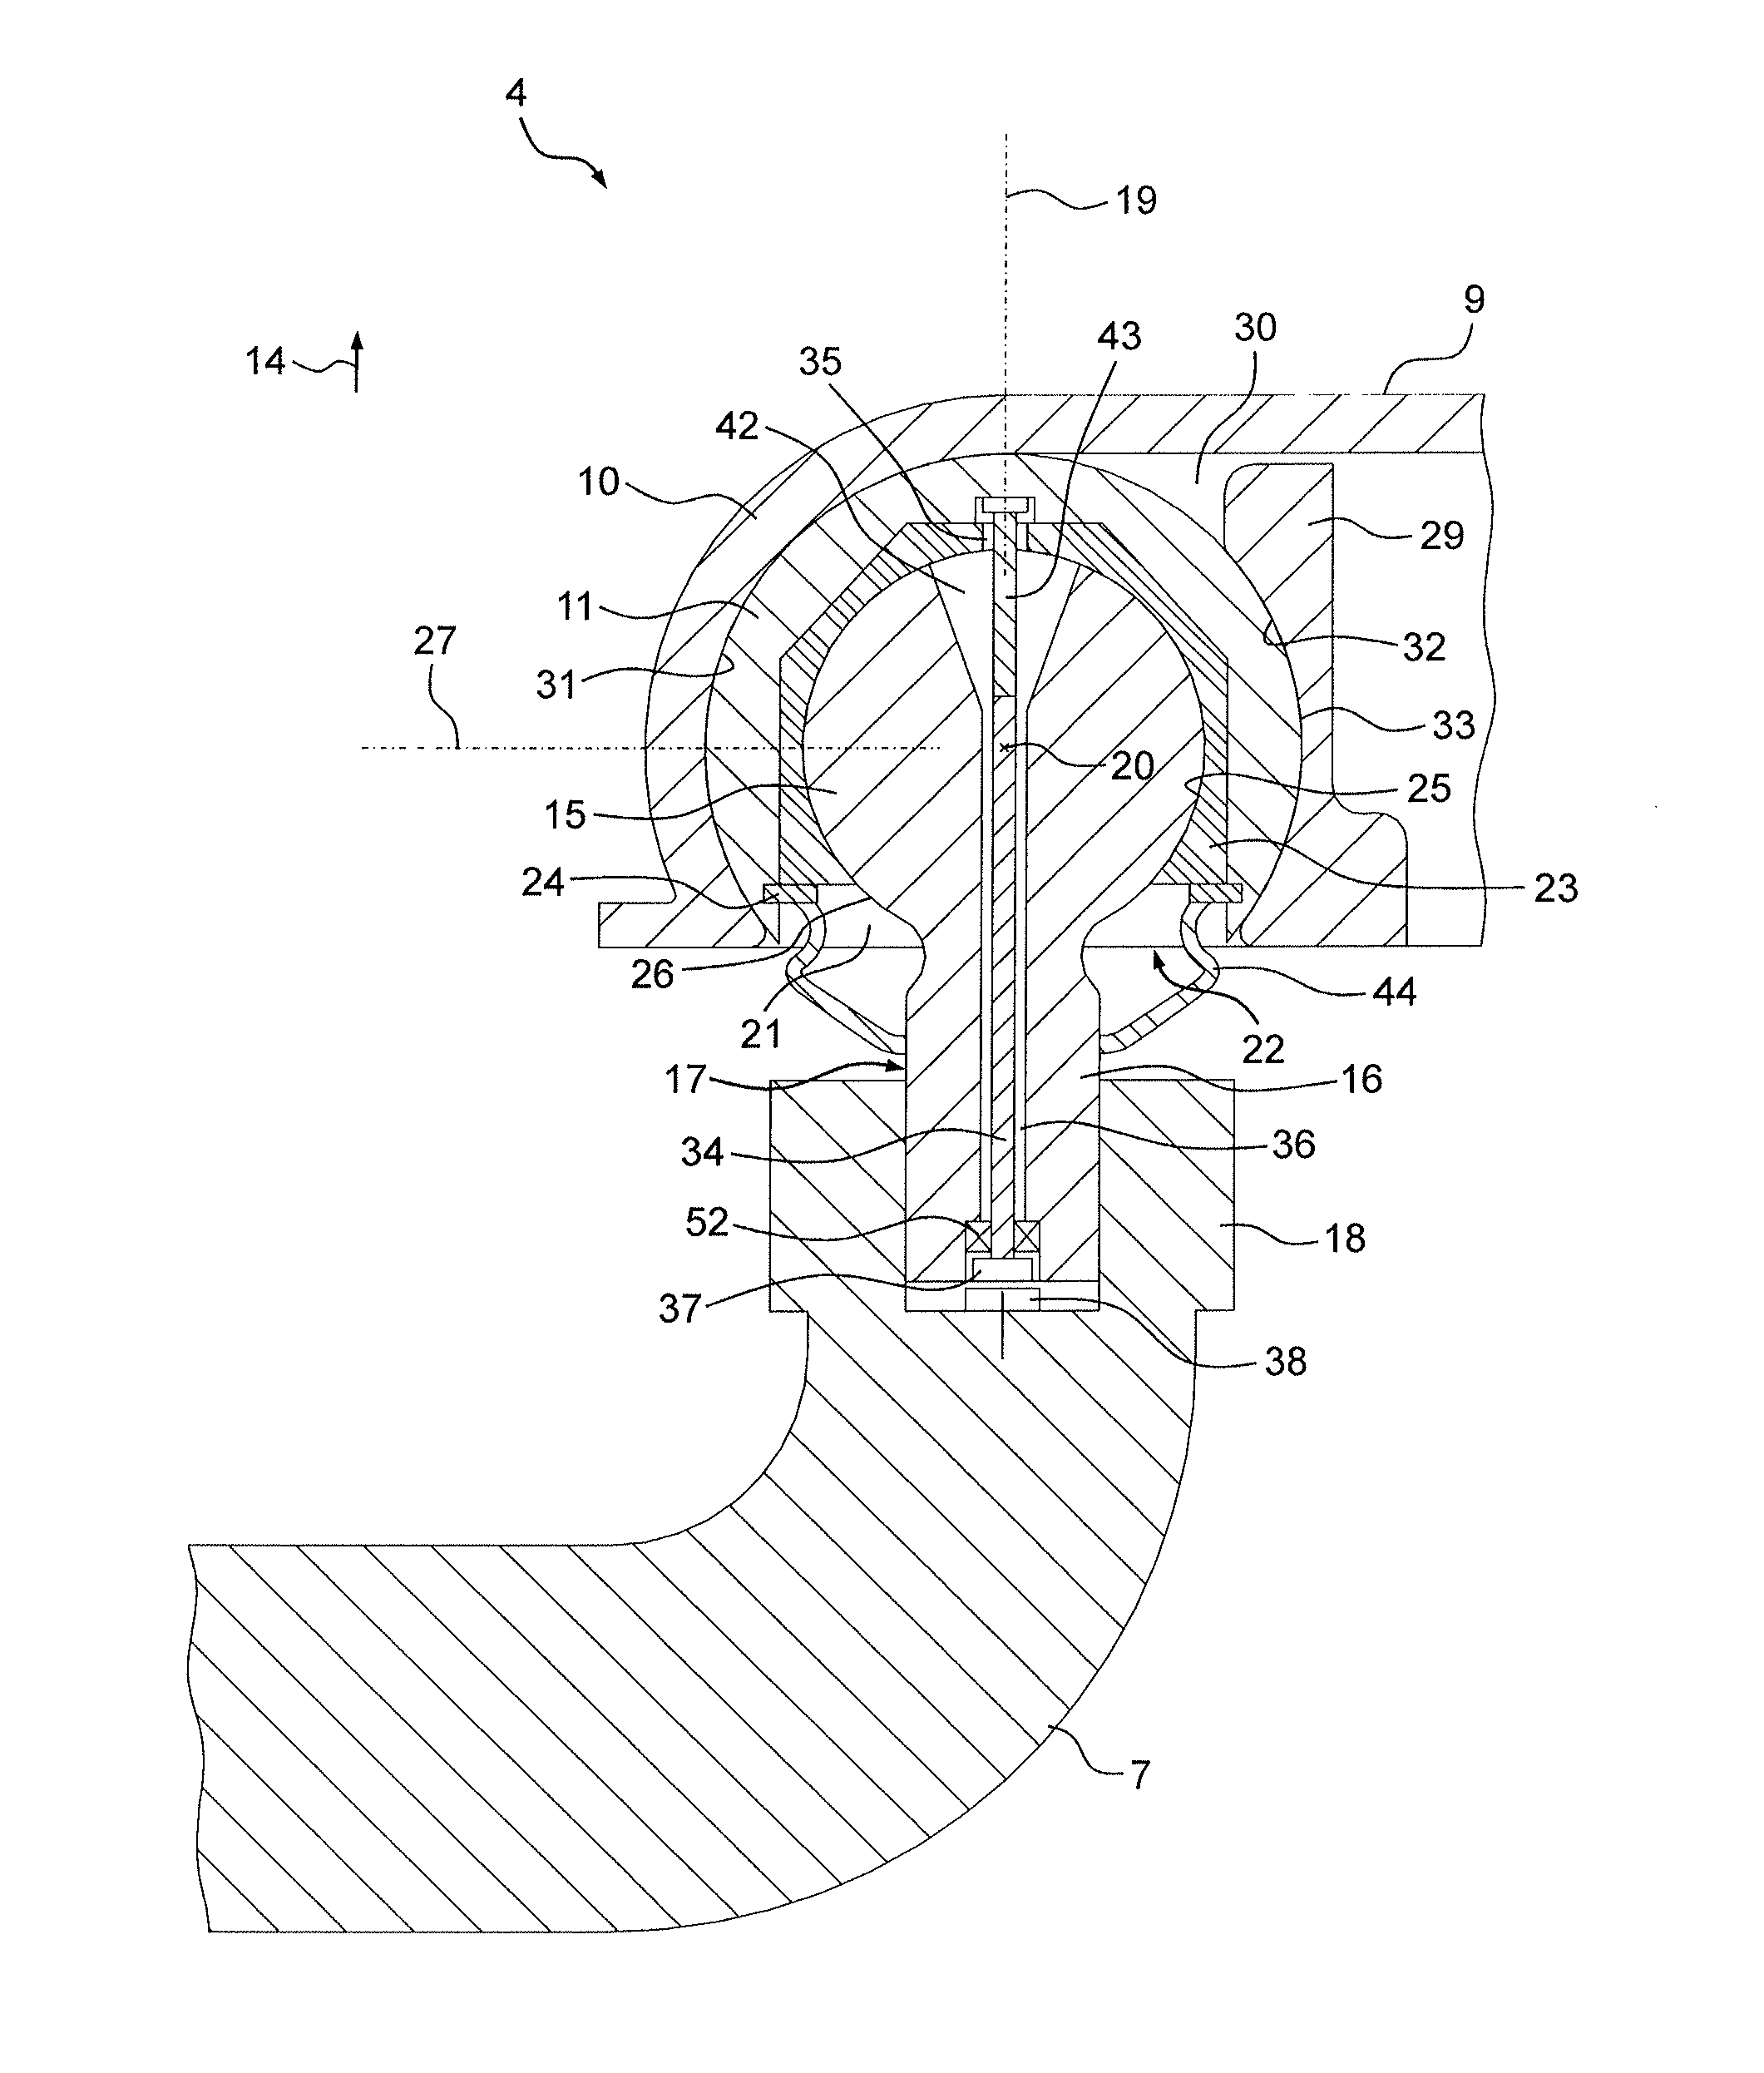 Trailer towing device for a tractor vehicle